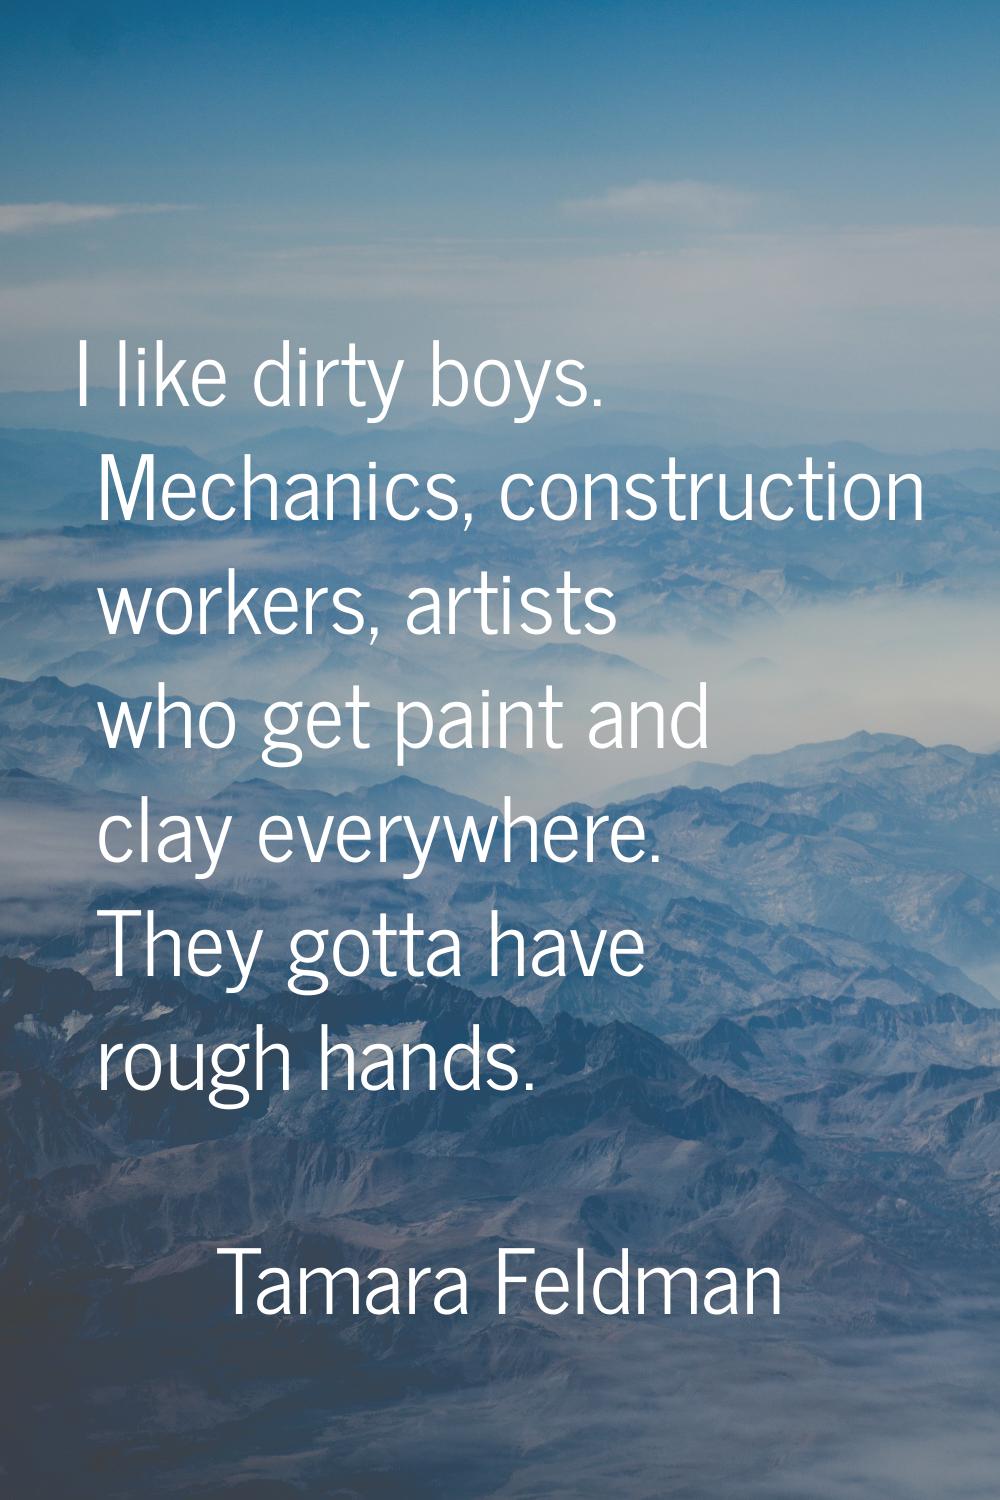 I like dirty boys. Mechanics, construction workers, artists who get paint and clay everywhere. They